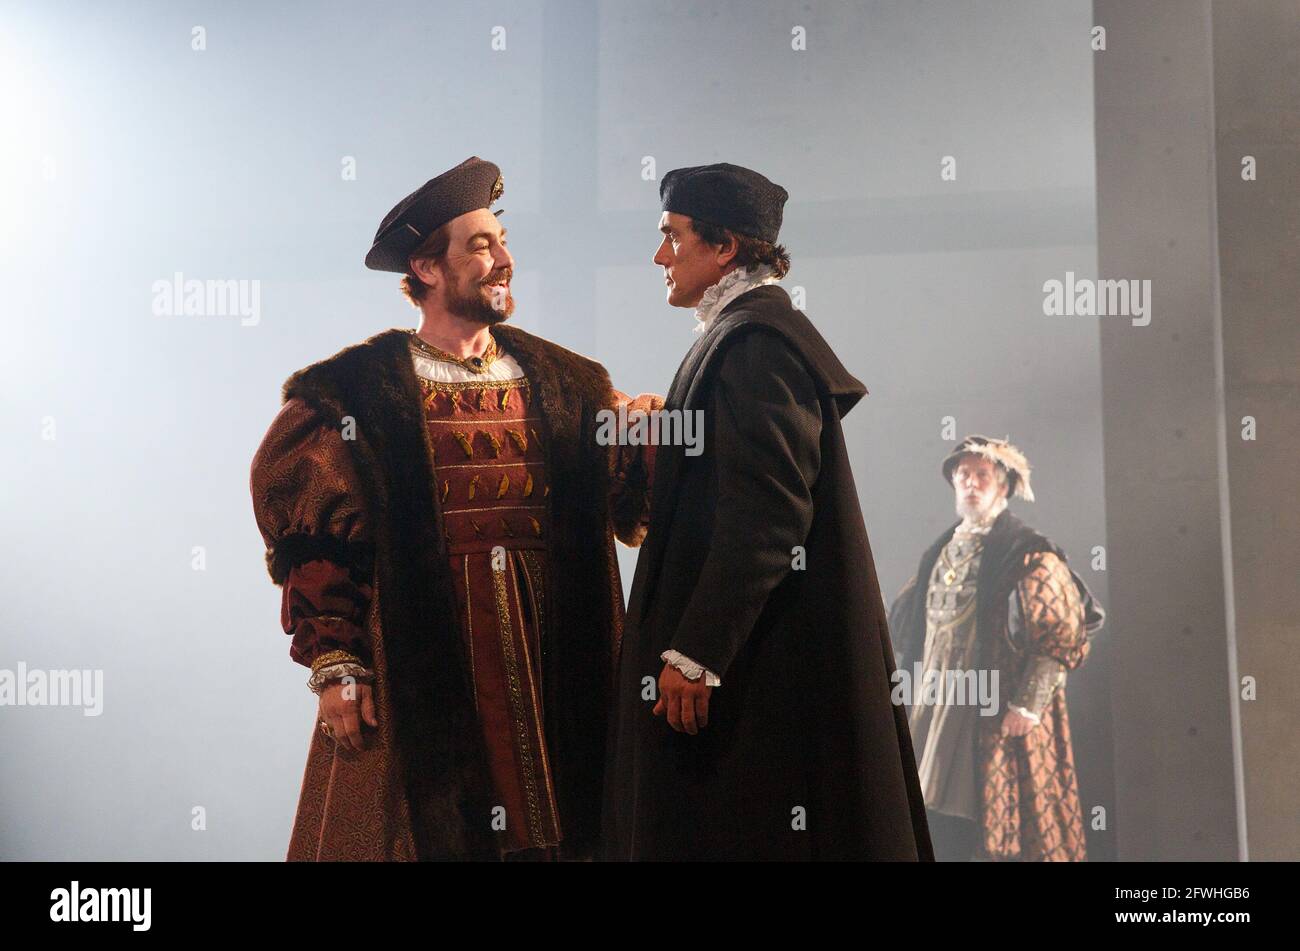 l-r: Nathaniel Parker (King Henry VIII), Ben Miles (Thomas Cromwell) in WOLF HALL by Hilary Mantel at the Royal Shakespeare Company (RSC), Aldwych Theatre, London WC2  17/05/2014 adapted for the stage by Mike Poulton  design: Christopher Oram  lighting: Paule Constable  director: Jeremy Herrin Stock Photo